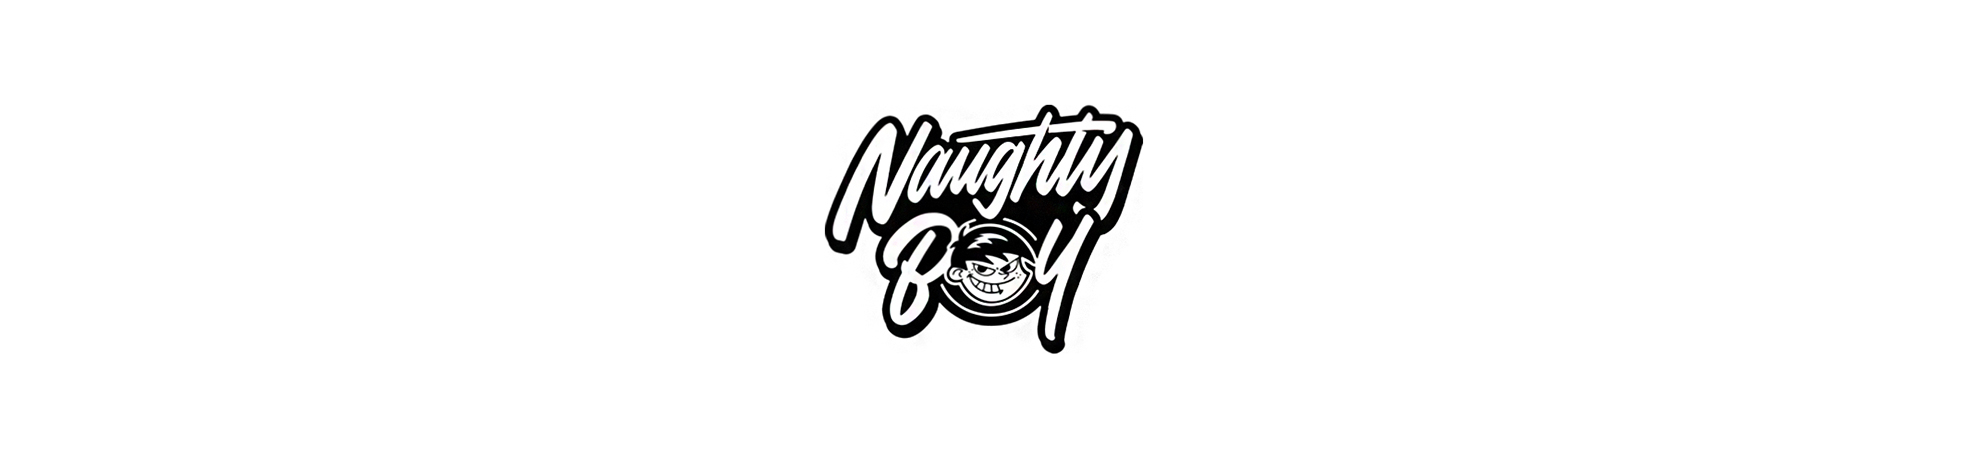 Naughty Boy Lifestyle Supplements